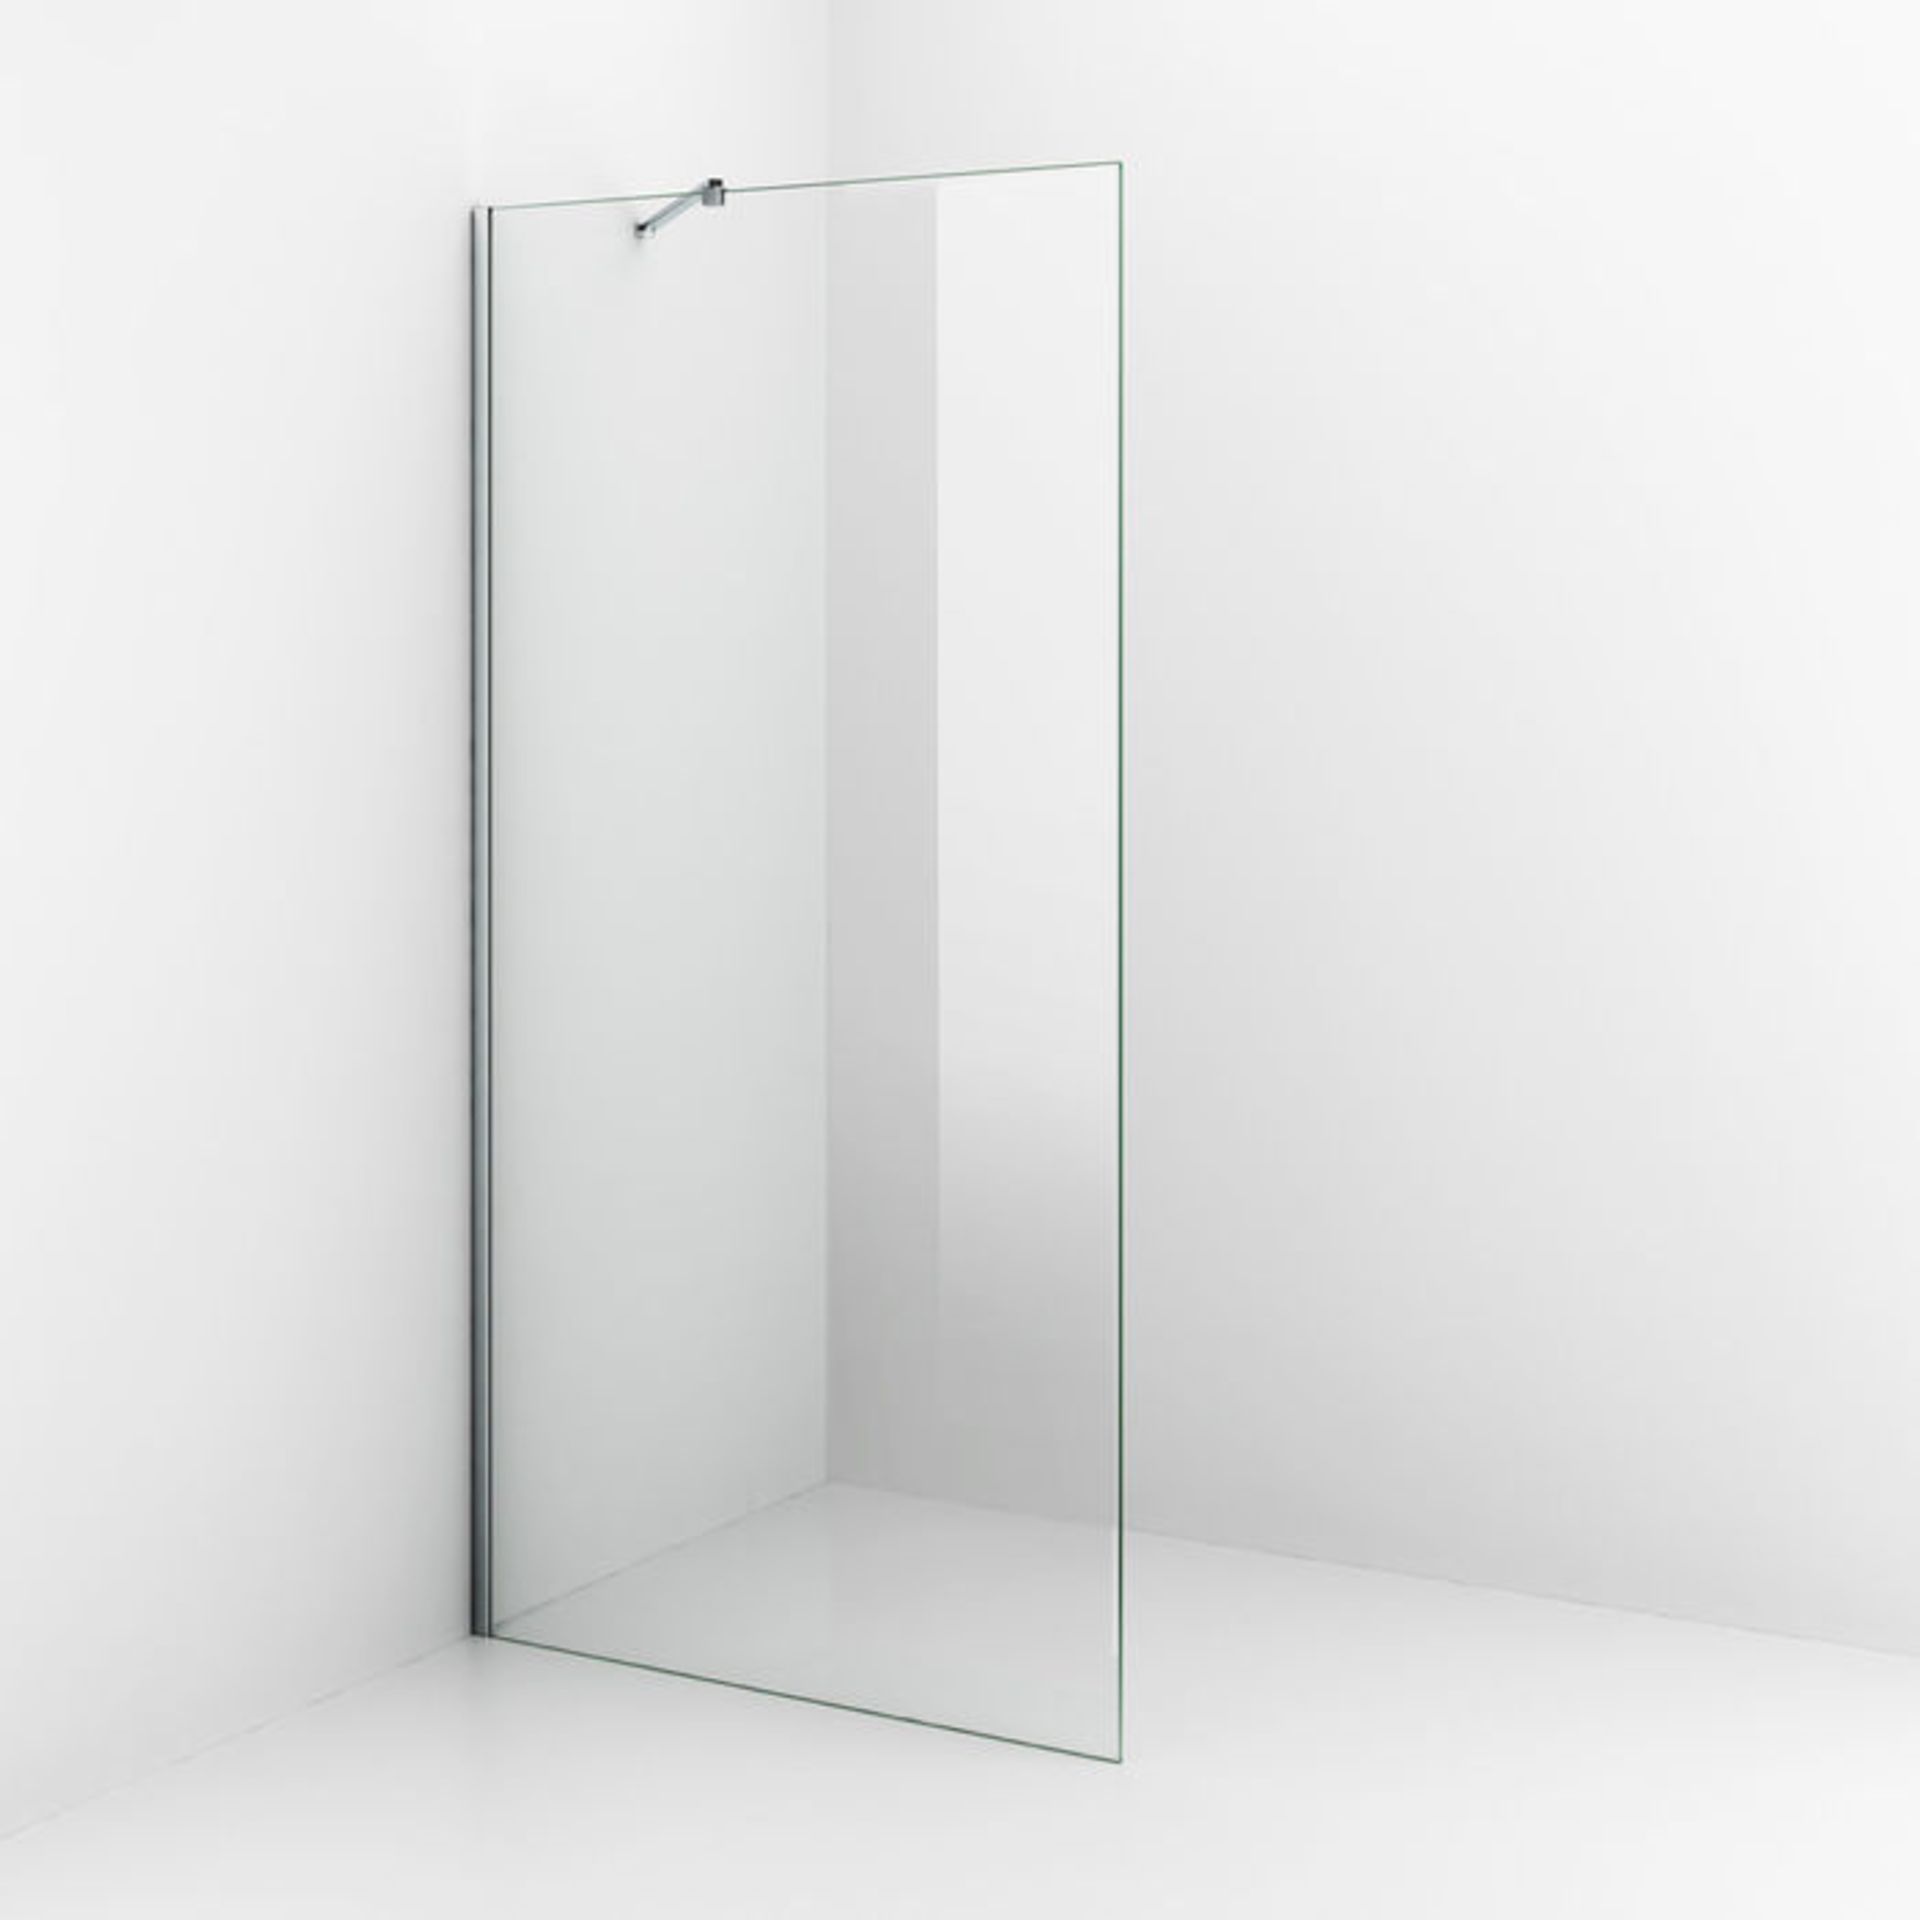 (G89) 900mm - 8mm - Premium EasyClean Wetroom Panel RRP £399.99 8mm EasyClean glass - Our glass - Image 4 of 7